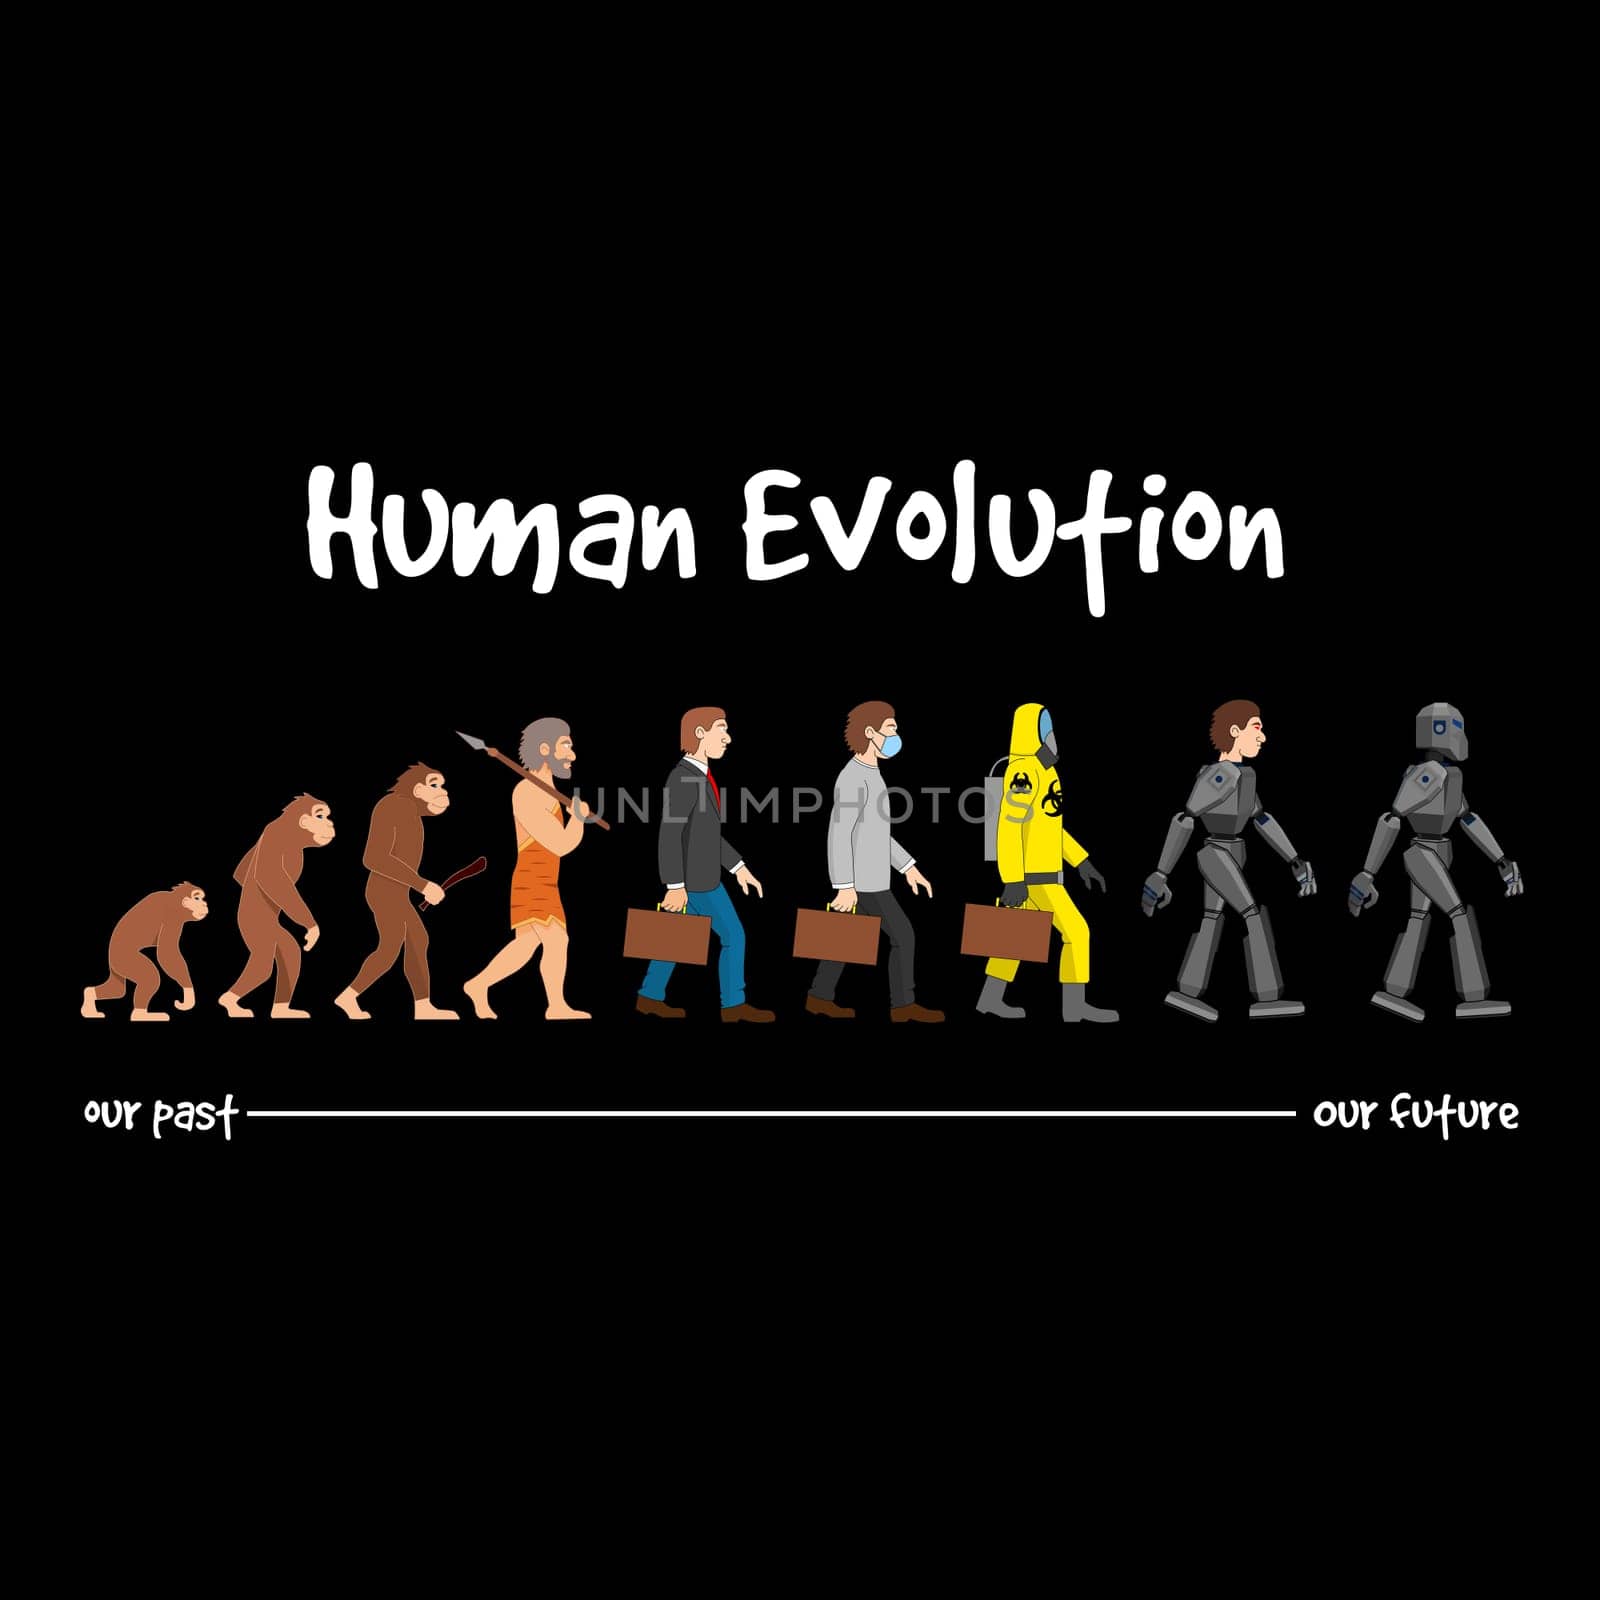 A funny human evolution timeline from times of monkey to future of robot men with the text "Human Evolution" above.